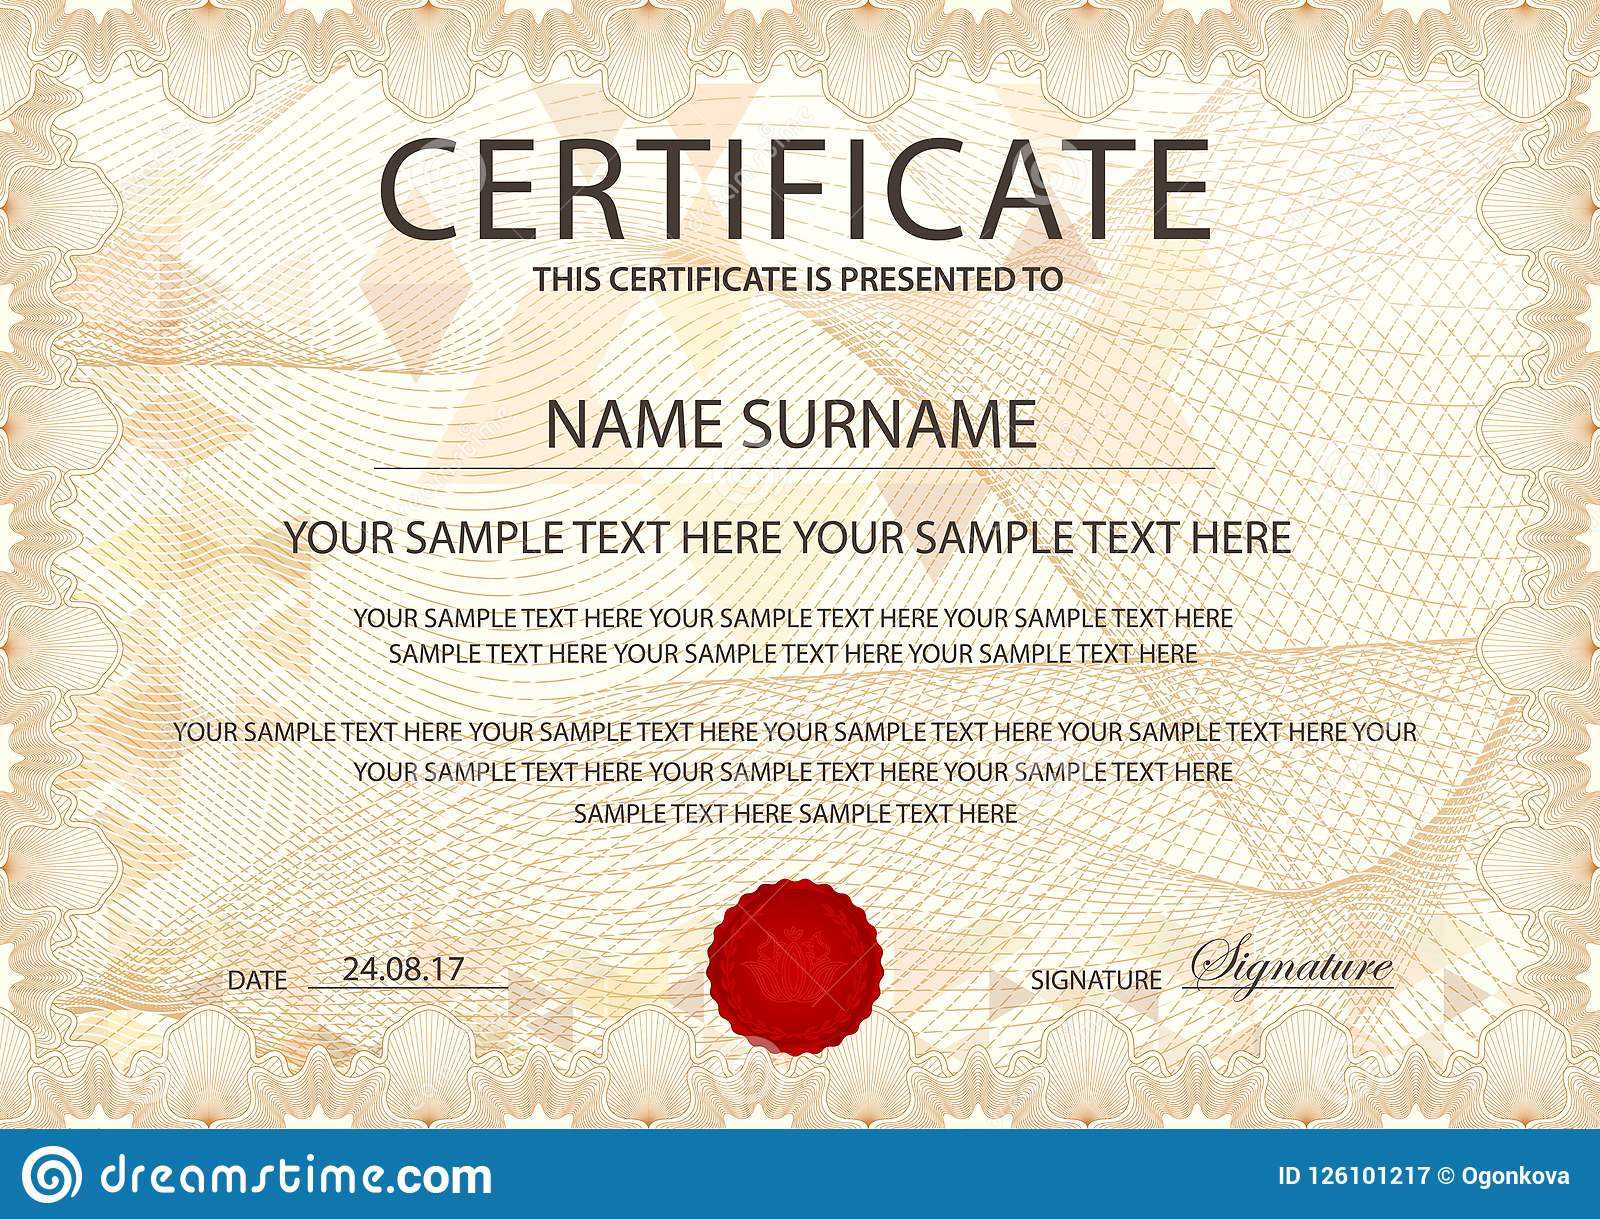 Certificate Template With Guilloche Pattern, Frame Border Pertaining To First Place Certificate Template